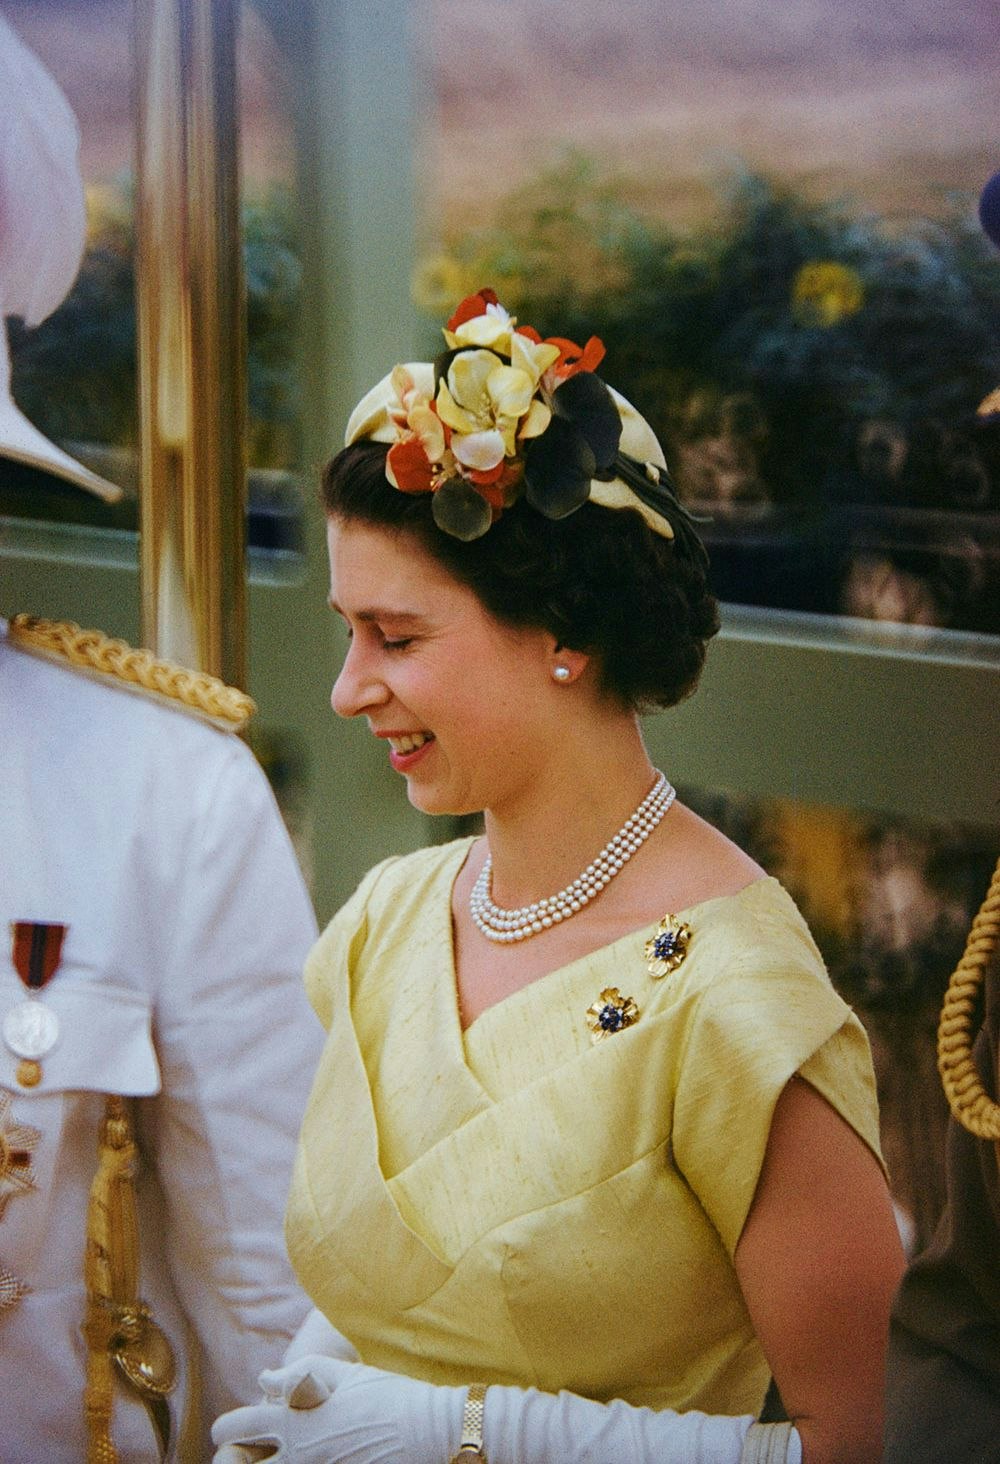 A head and shoulders of a woman in a yellow dress and floral headpiece. She is wearing white gloves and smiling at somethint